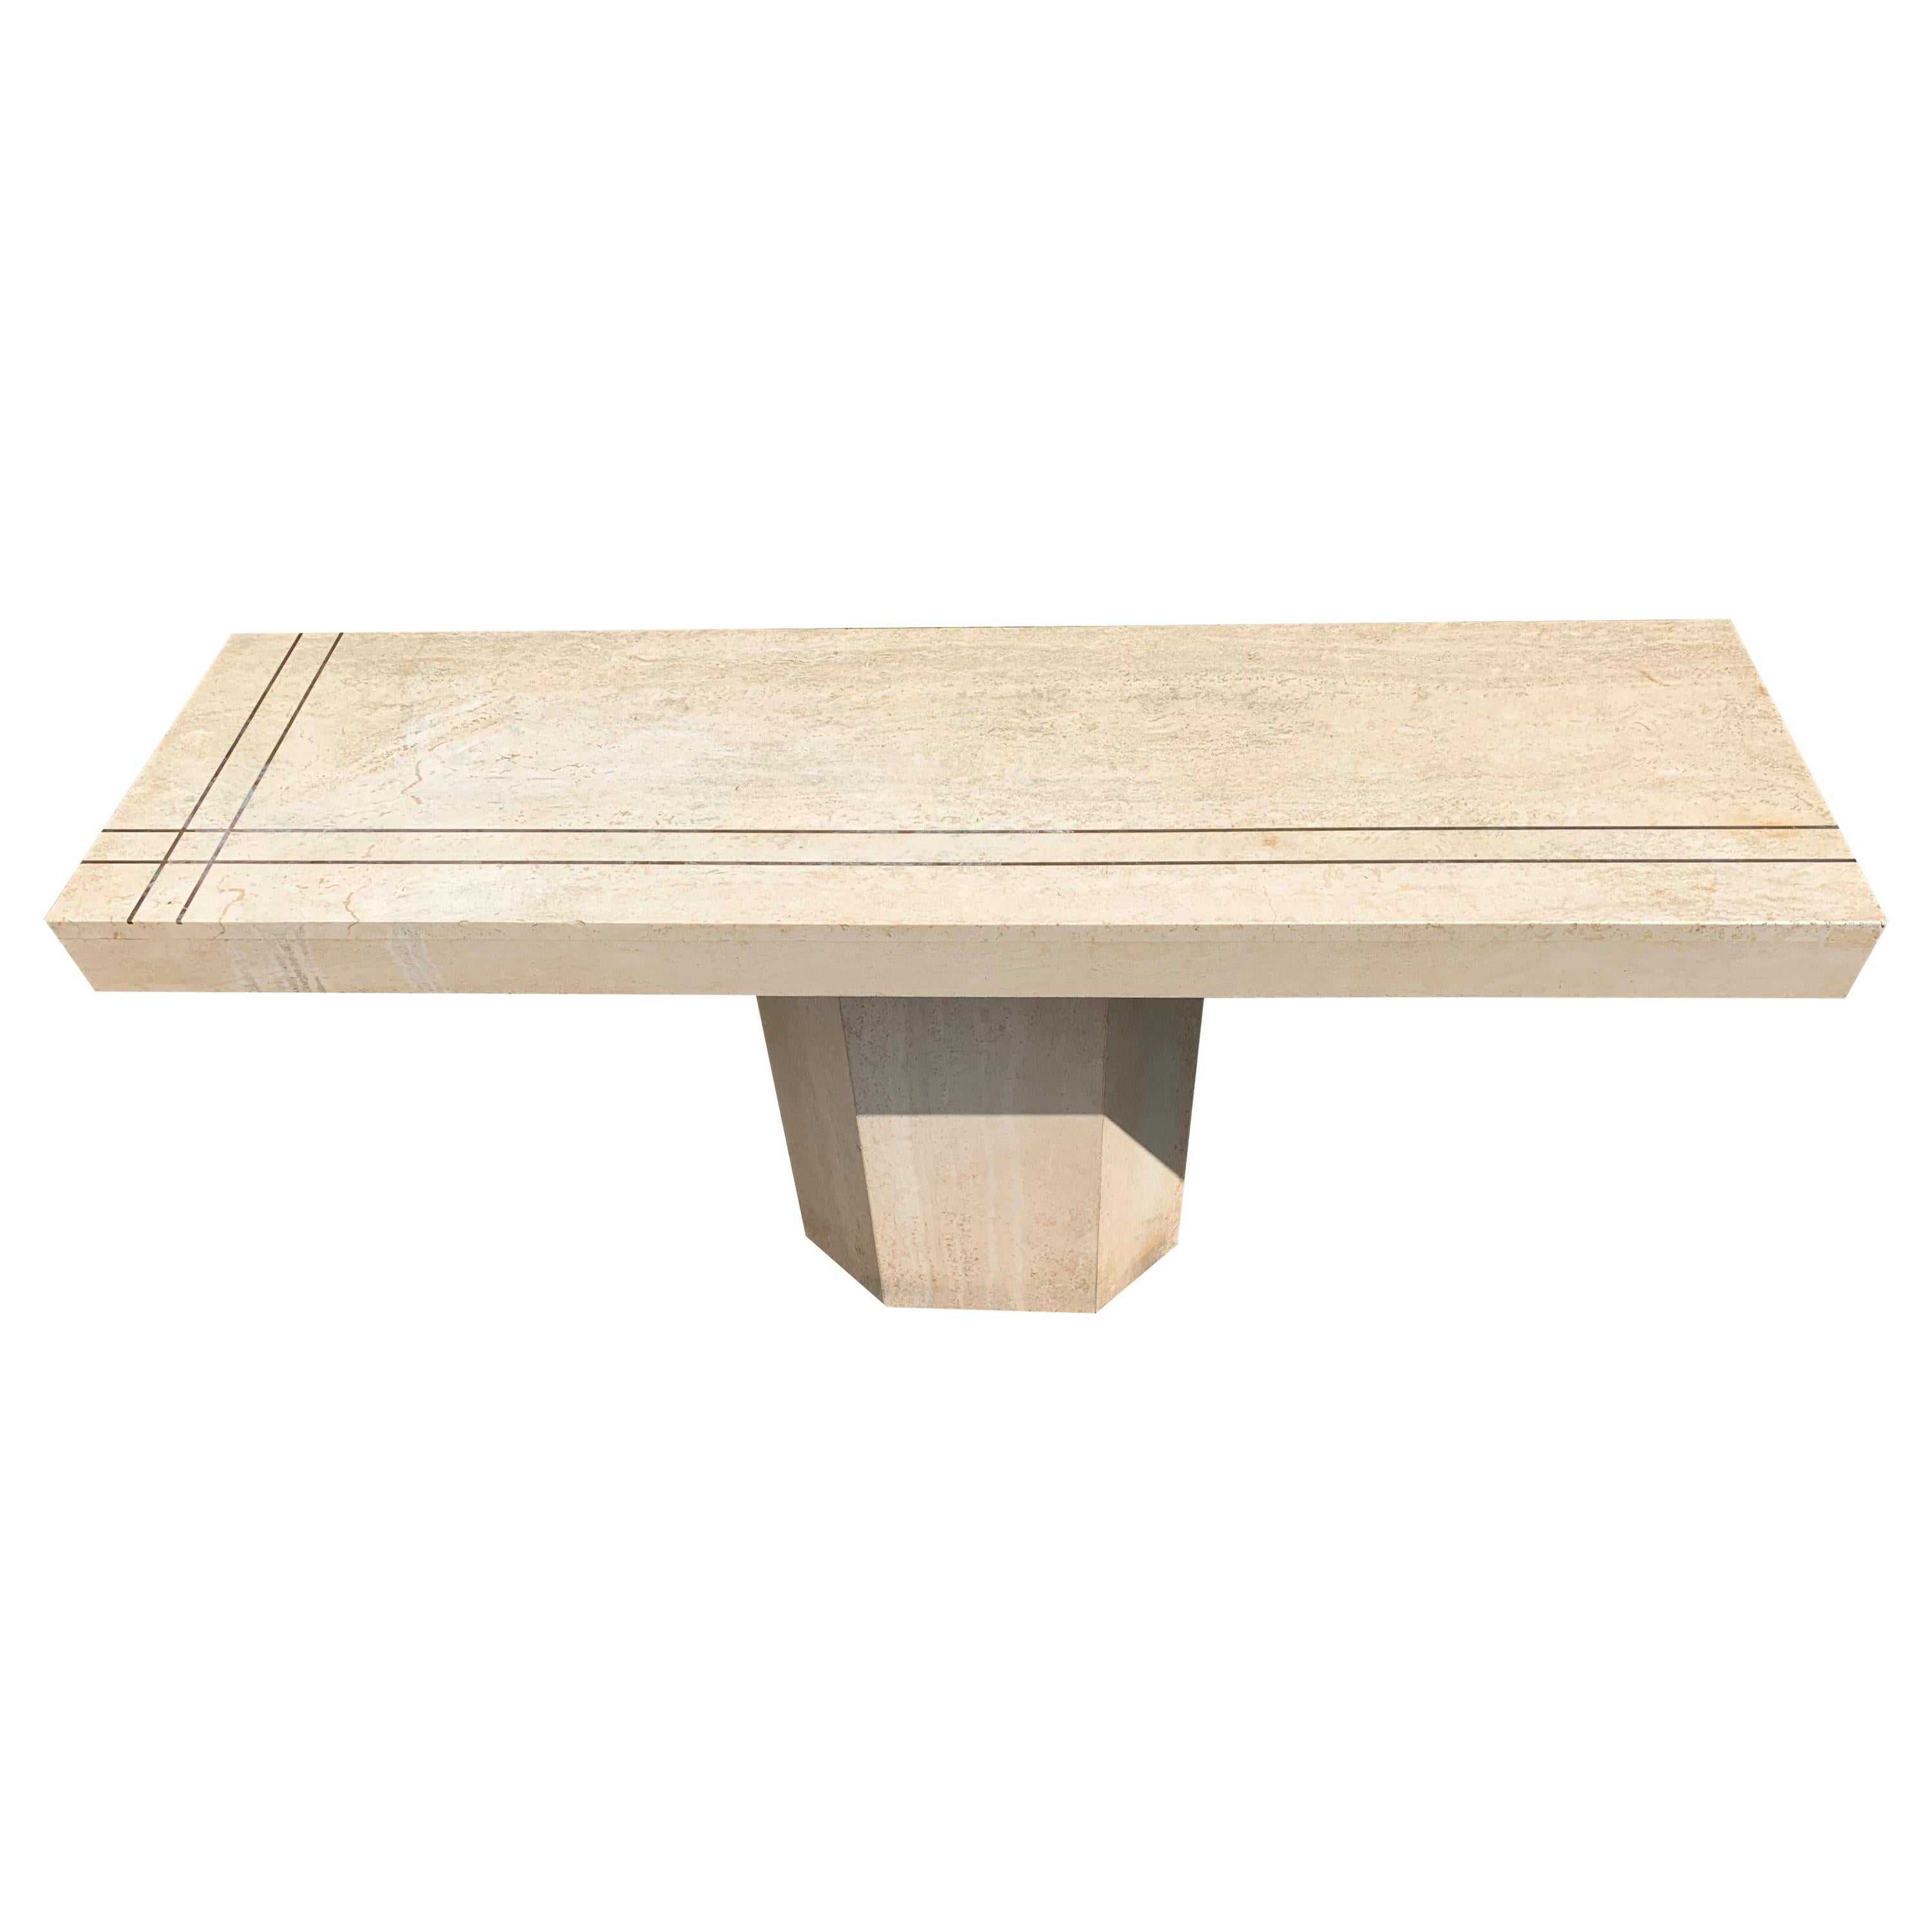 Great Shape Mid-Century Modern Travertine Console Table / Display / Side Table 